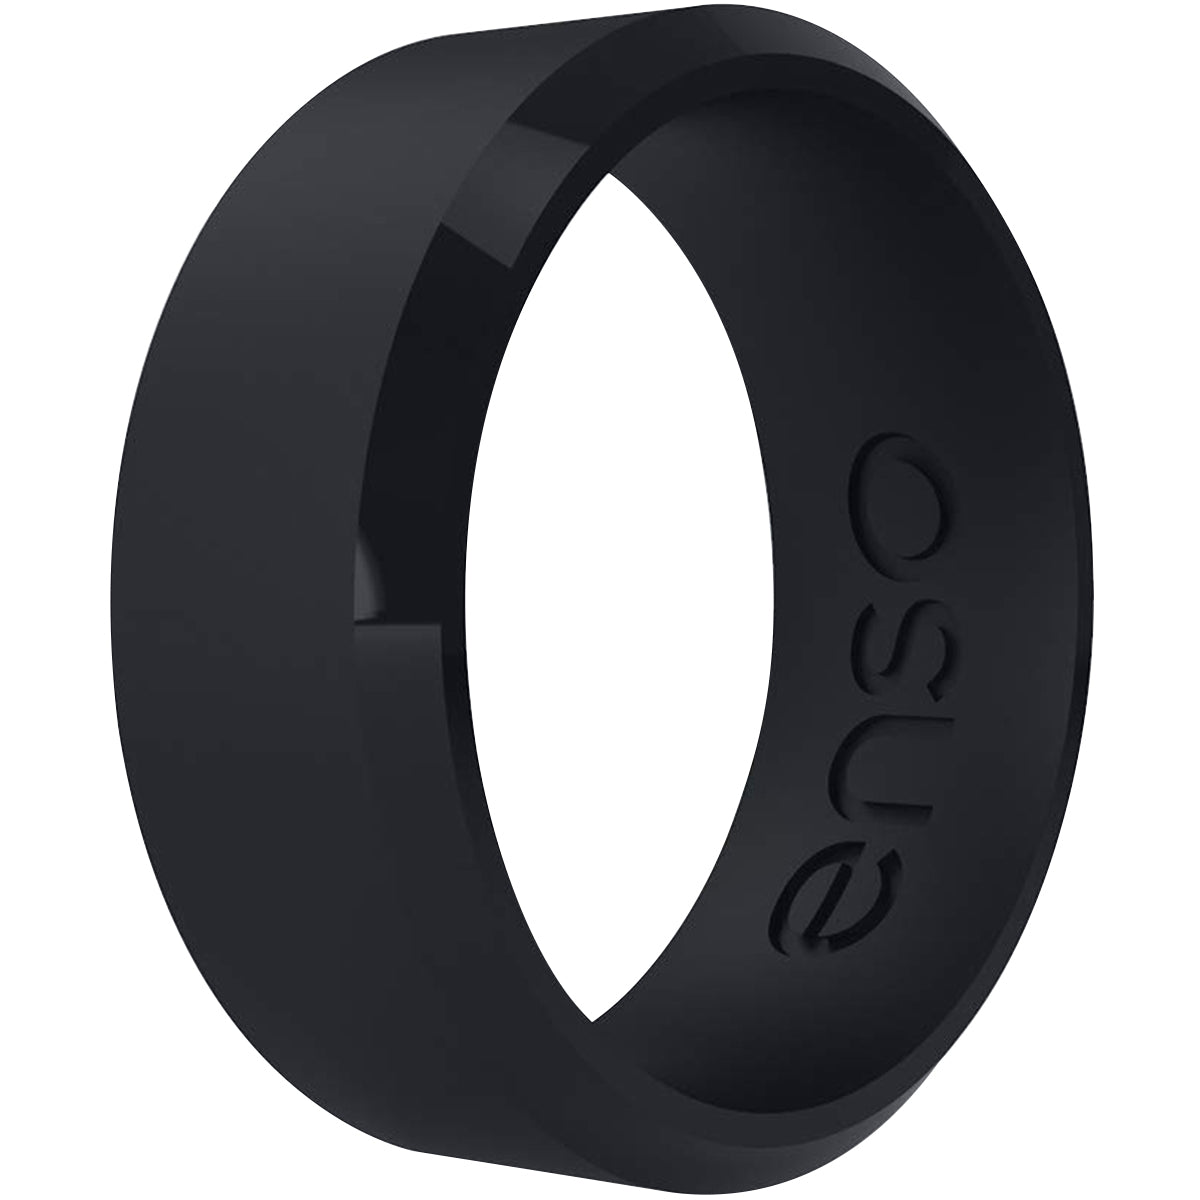 Enso Rings Classic Bevel Series Silicone Ring - Obsidian Enso Rings